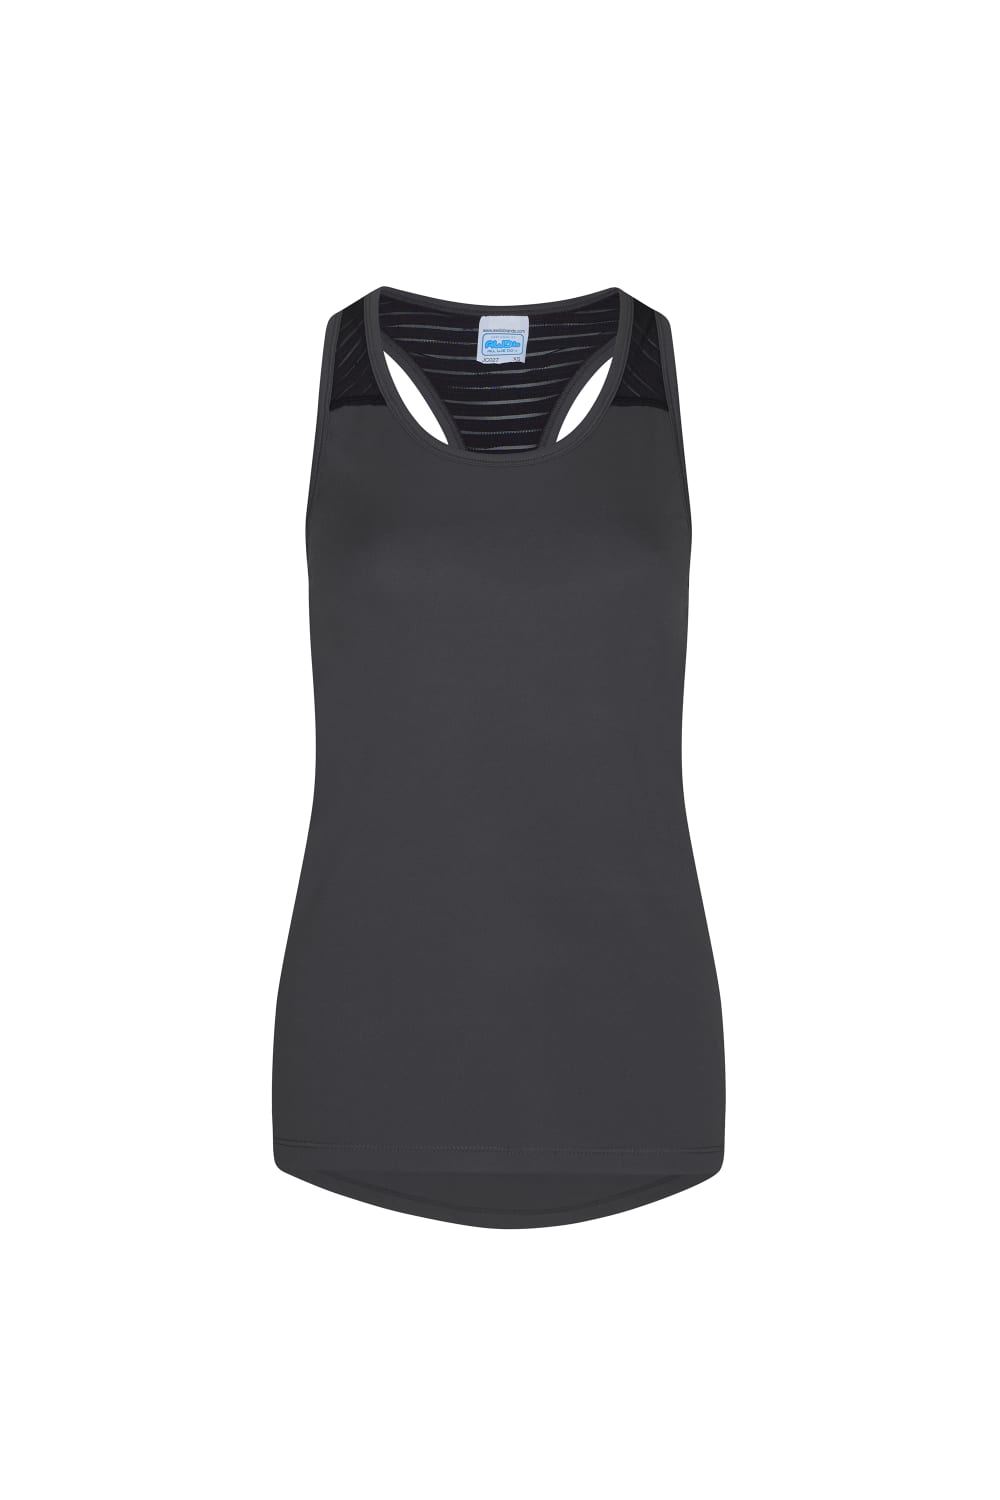 Womens/Ladies Girlie Smooth Workout Vest - Charcoal